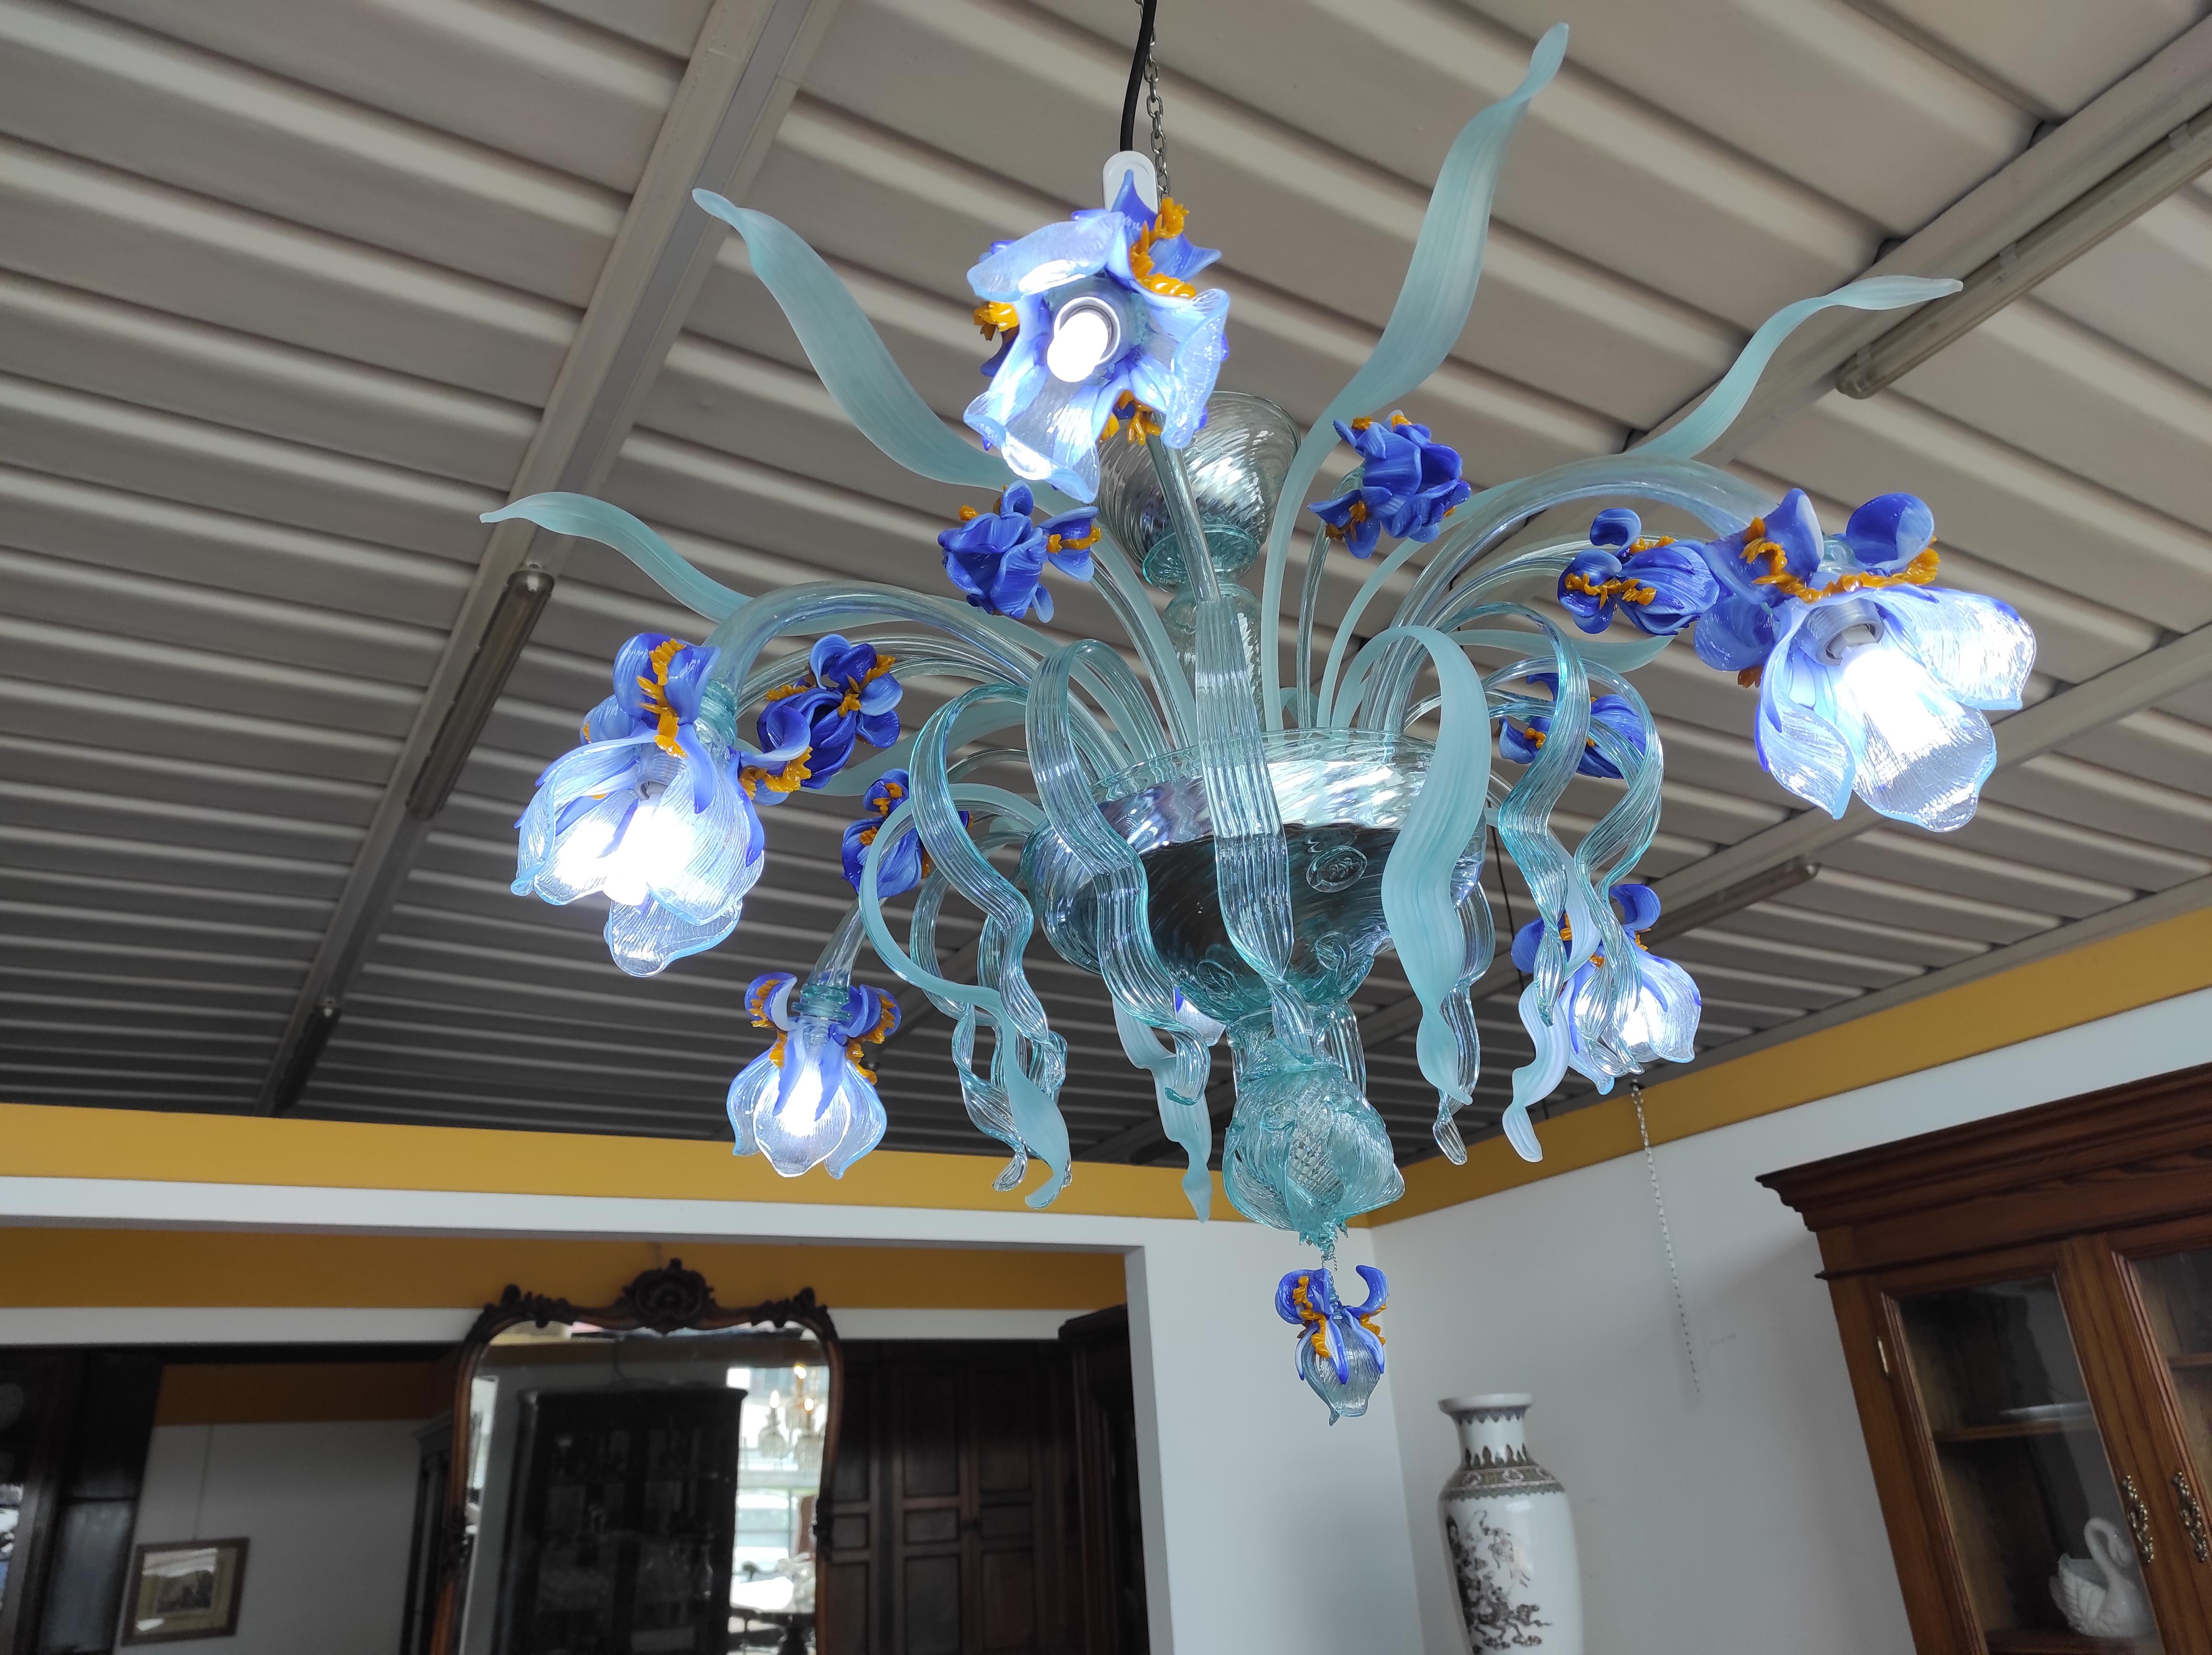 Murano blown glass 8-light chandelier produced by master Busato.Features 8 lights and 8 G9 bulbs.
It is inspired by Vincent Van Gogh's work made while he was hospitalized at St. Paul-de-Mausole Hospital in Saint-Rémy, a year before his death
Van